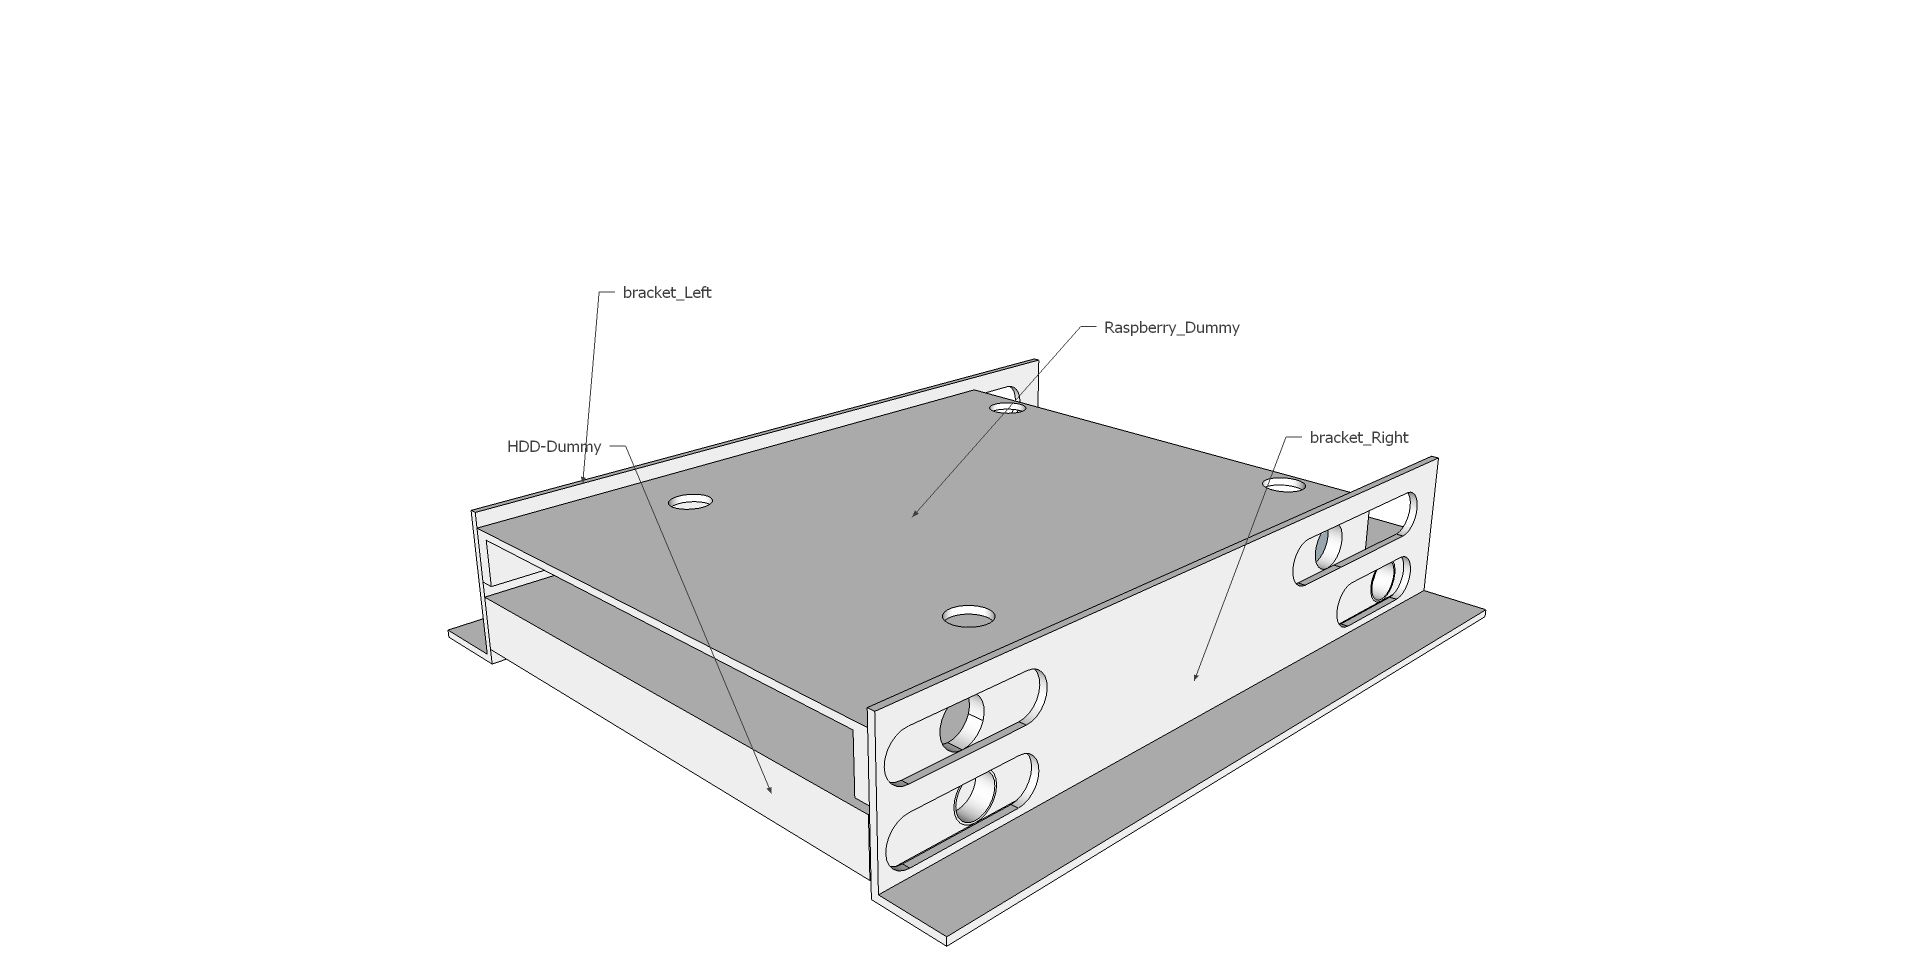 A mockup of the raspberry, showing a HDD-dummy underneath a raspberry 2.5-inch converter-plate